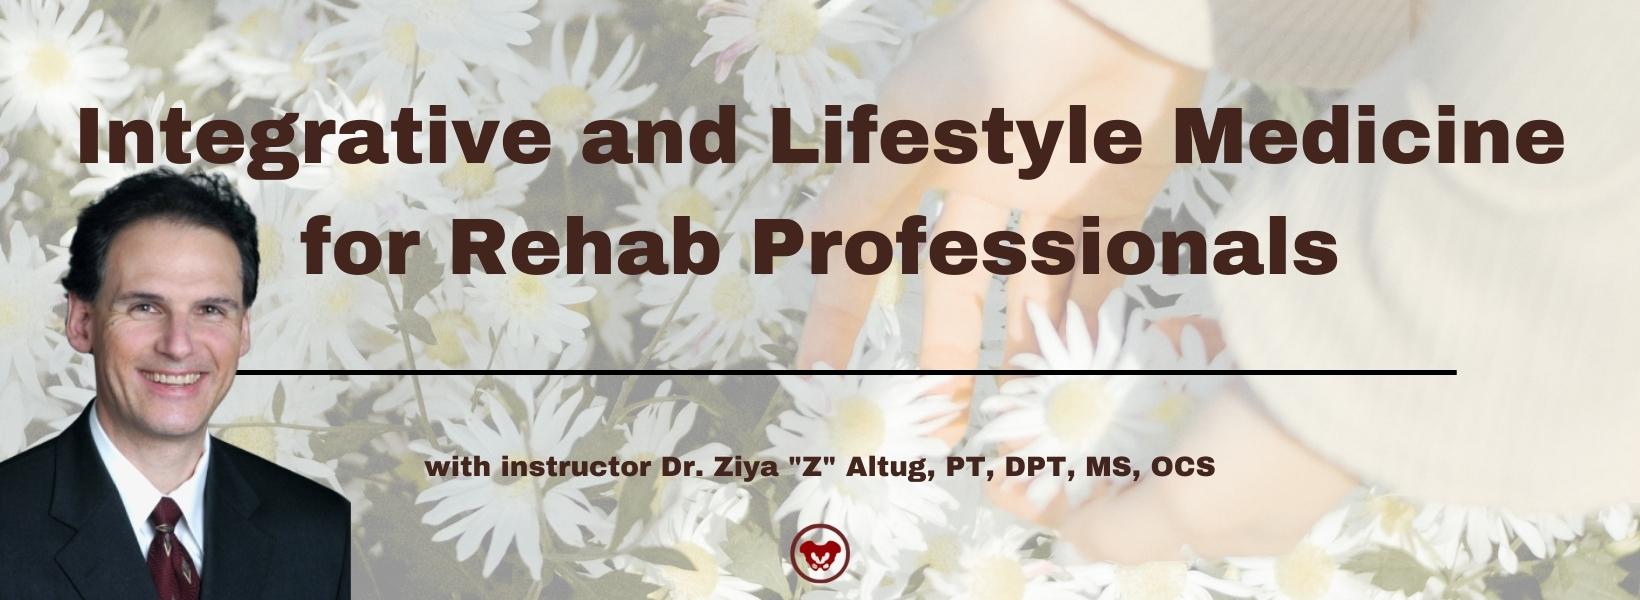 Integrative and Lifestyle Medicine for Rehab Professionals